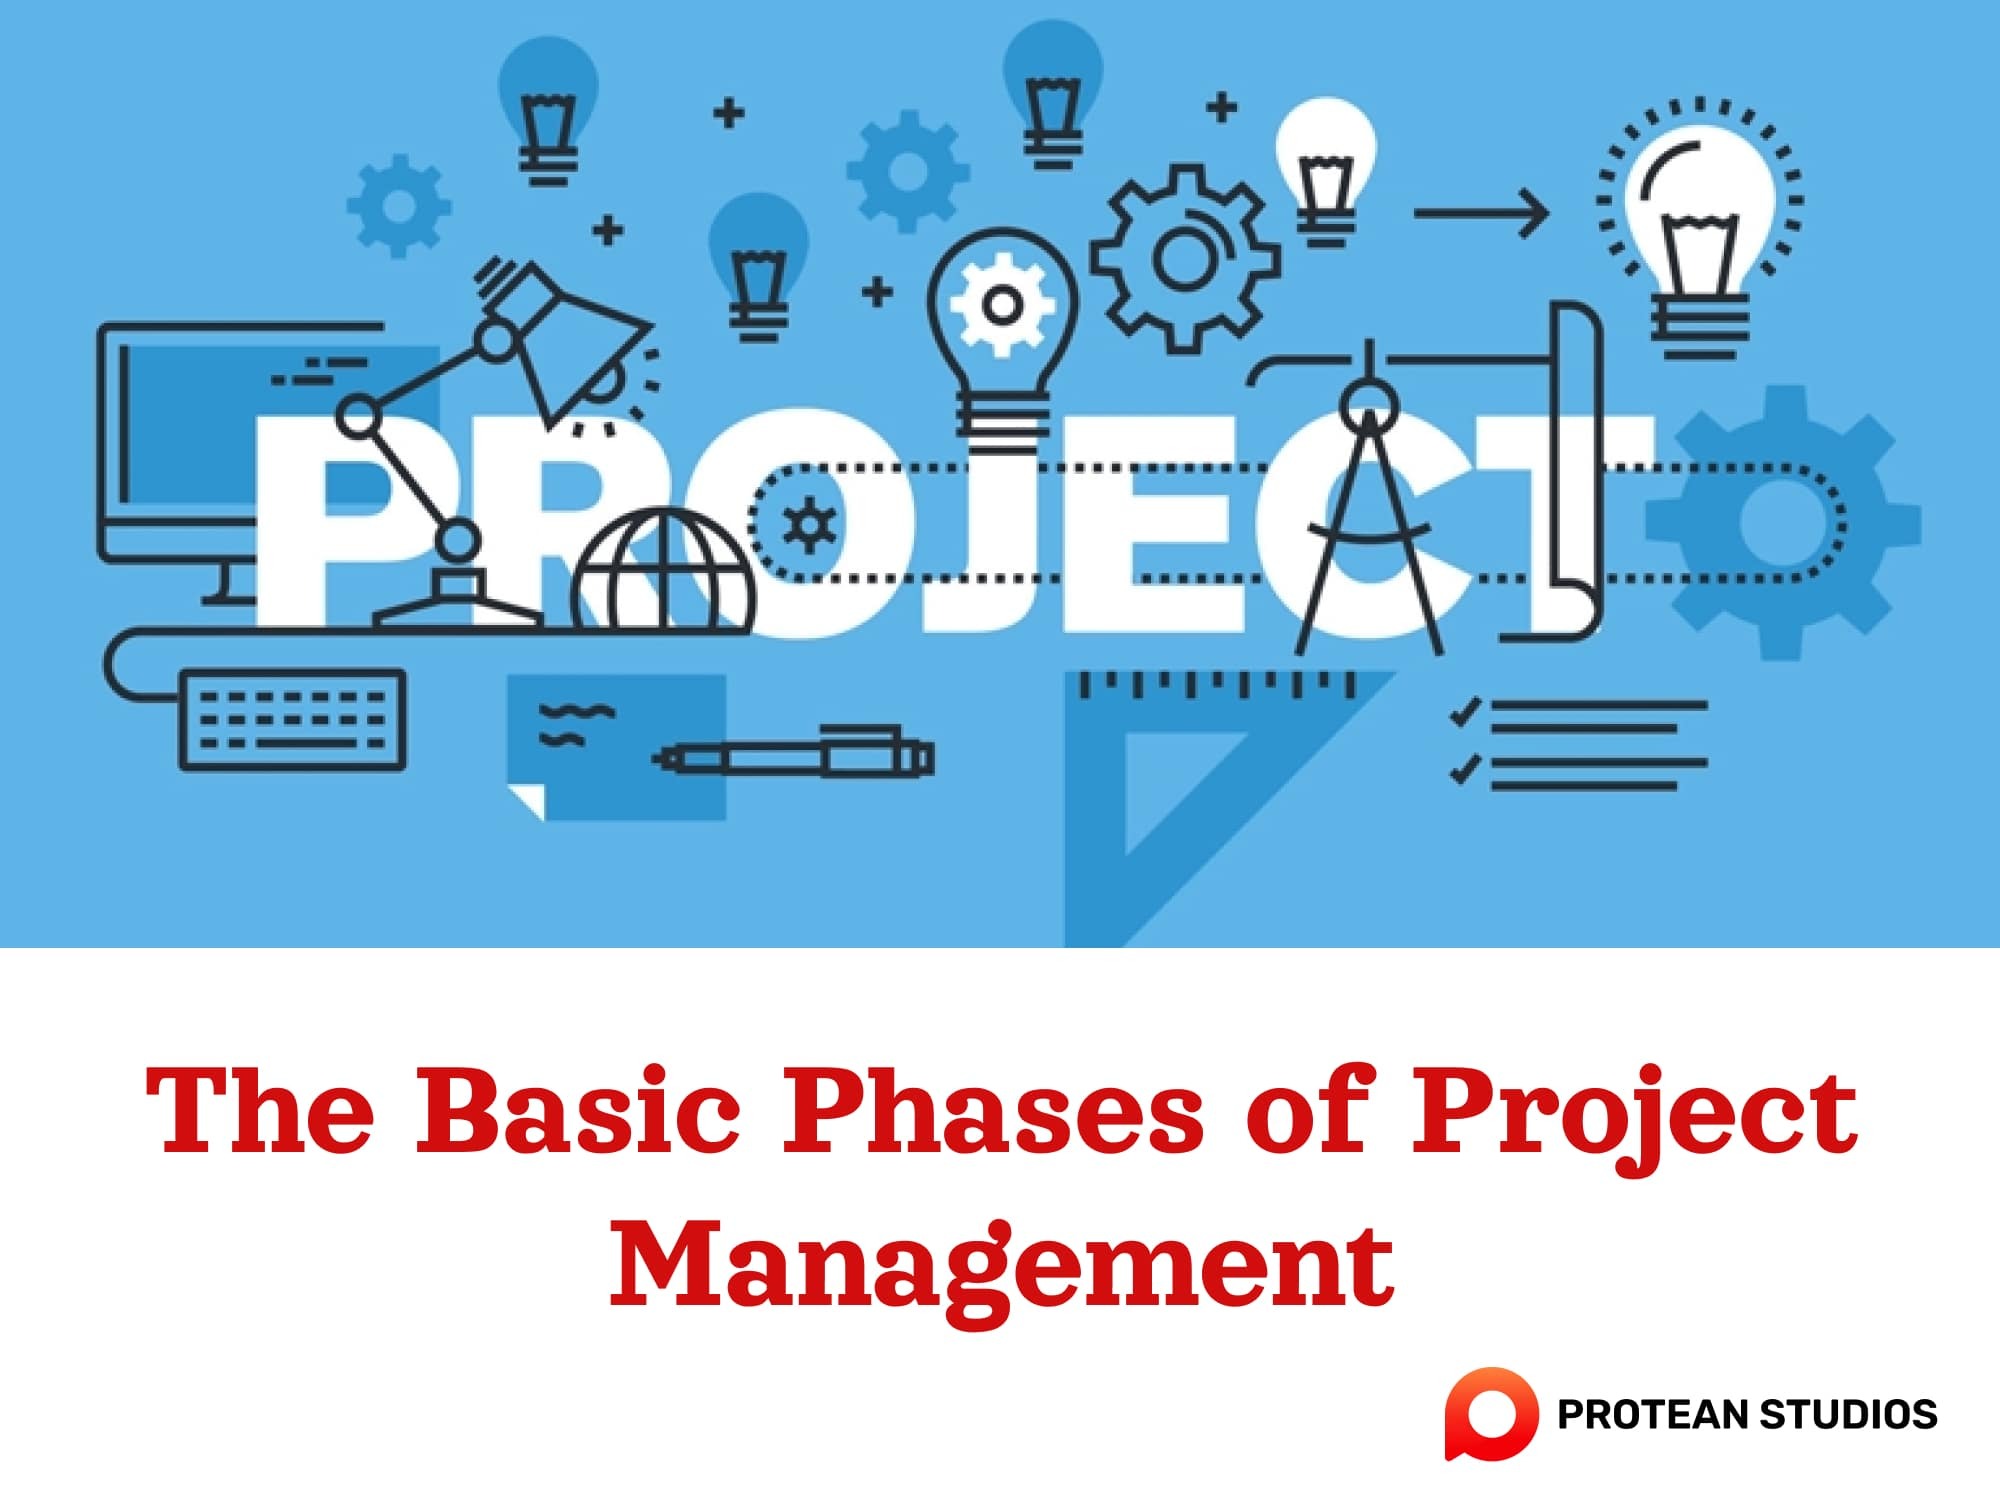 The essential steps when implementing project management